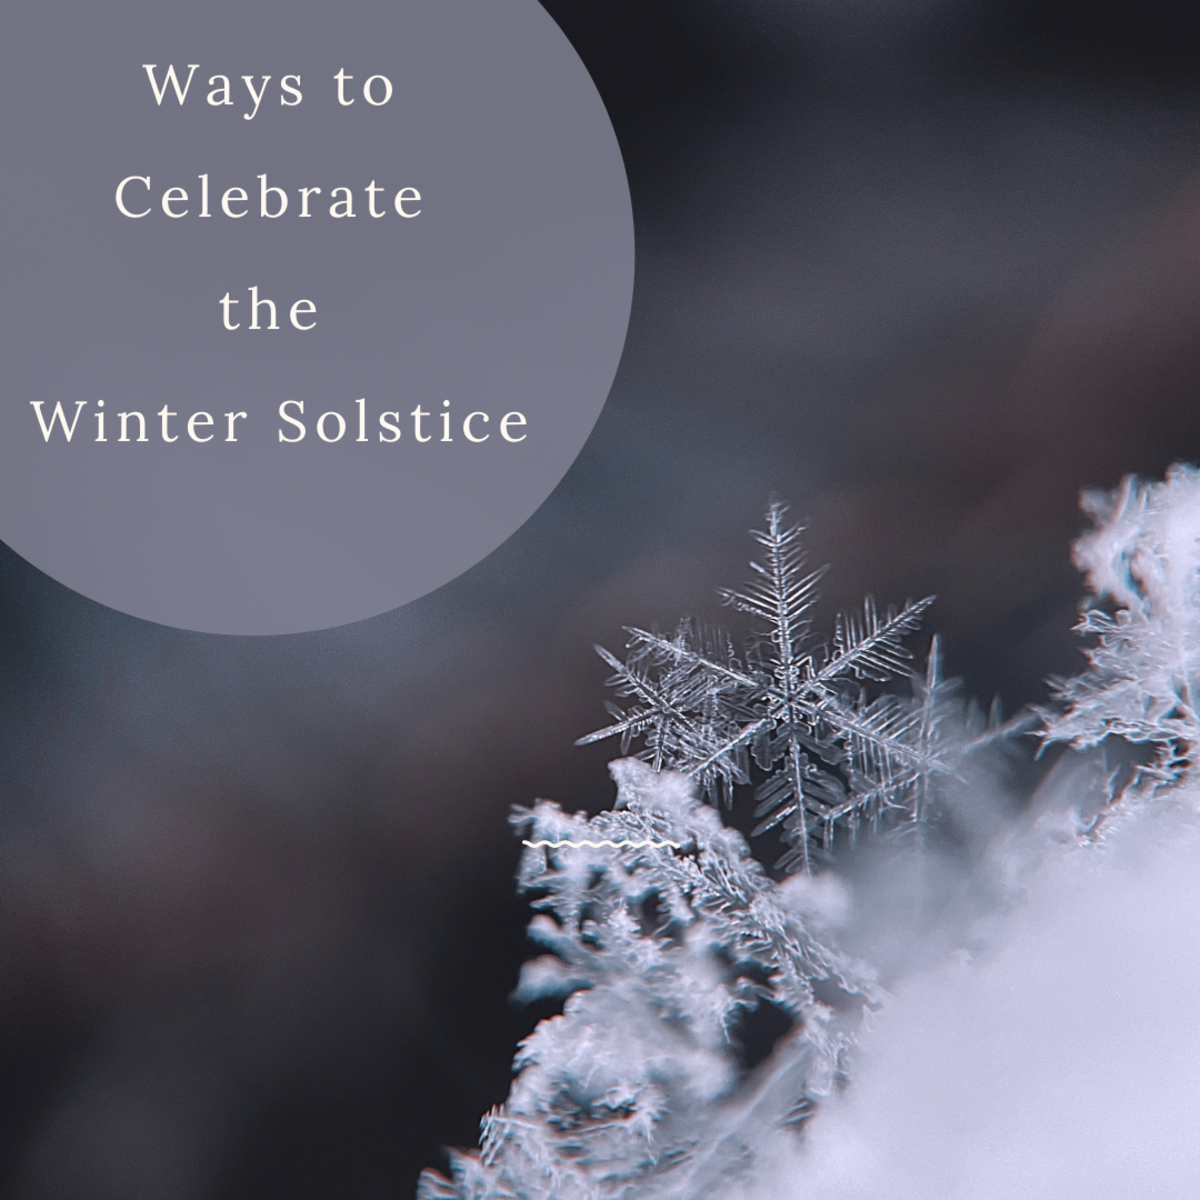 Wiccan Wheel of the Year: Yule Correspondences and Associations for the Winter Solstice